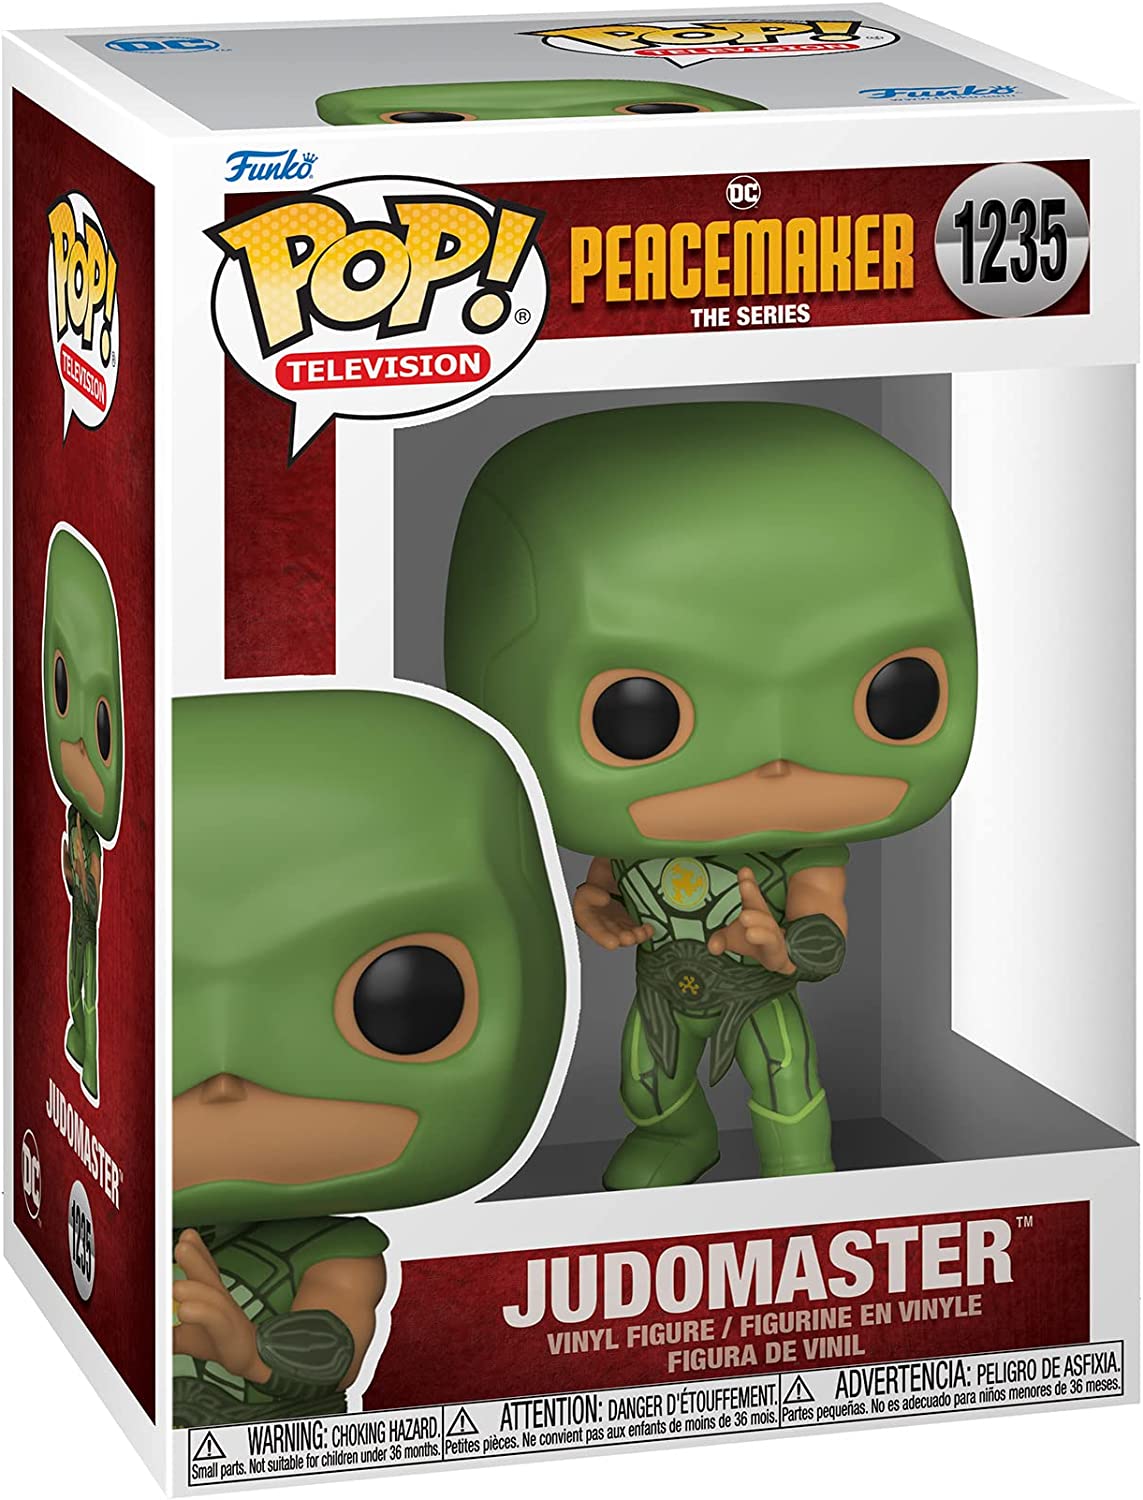 Funko Pop! TV: Peacemaker - Judomaster $5.45 + Free Shipping w/ Amazon Prime or Orders $25+